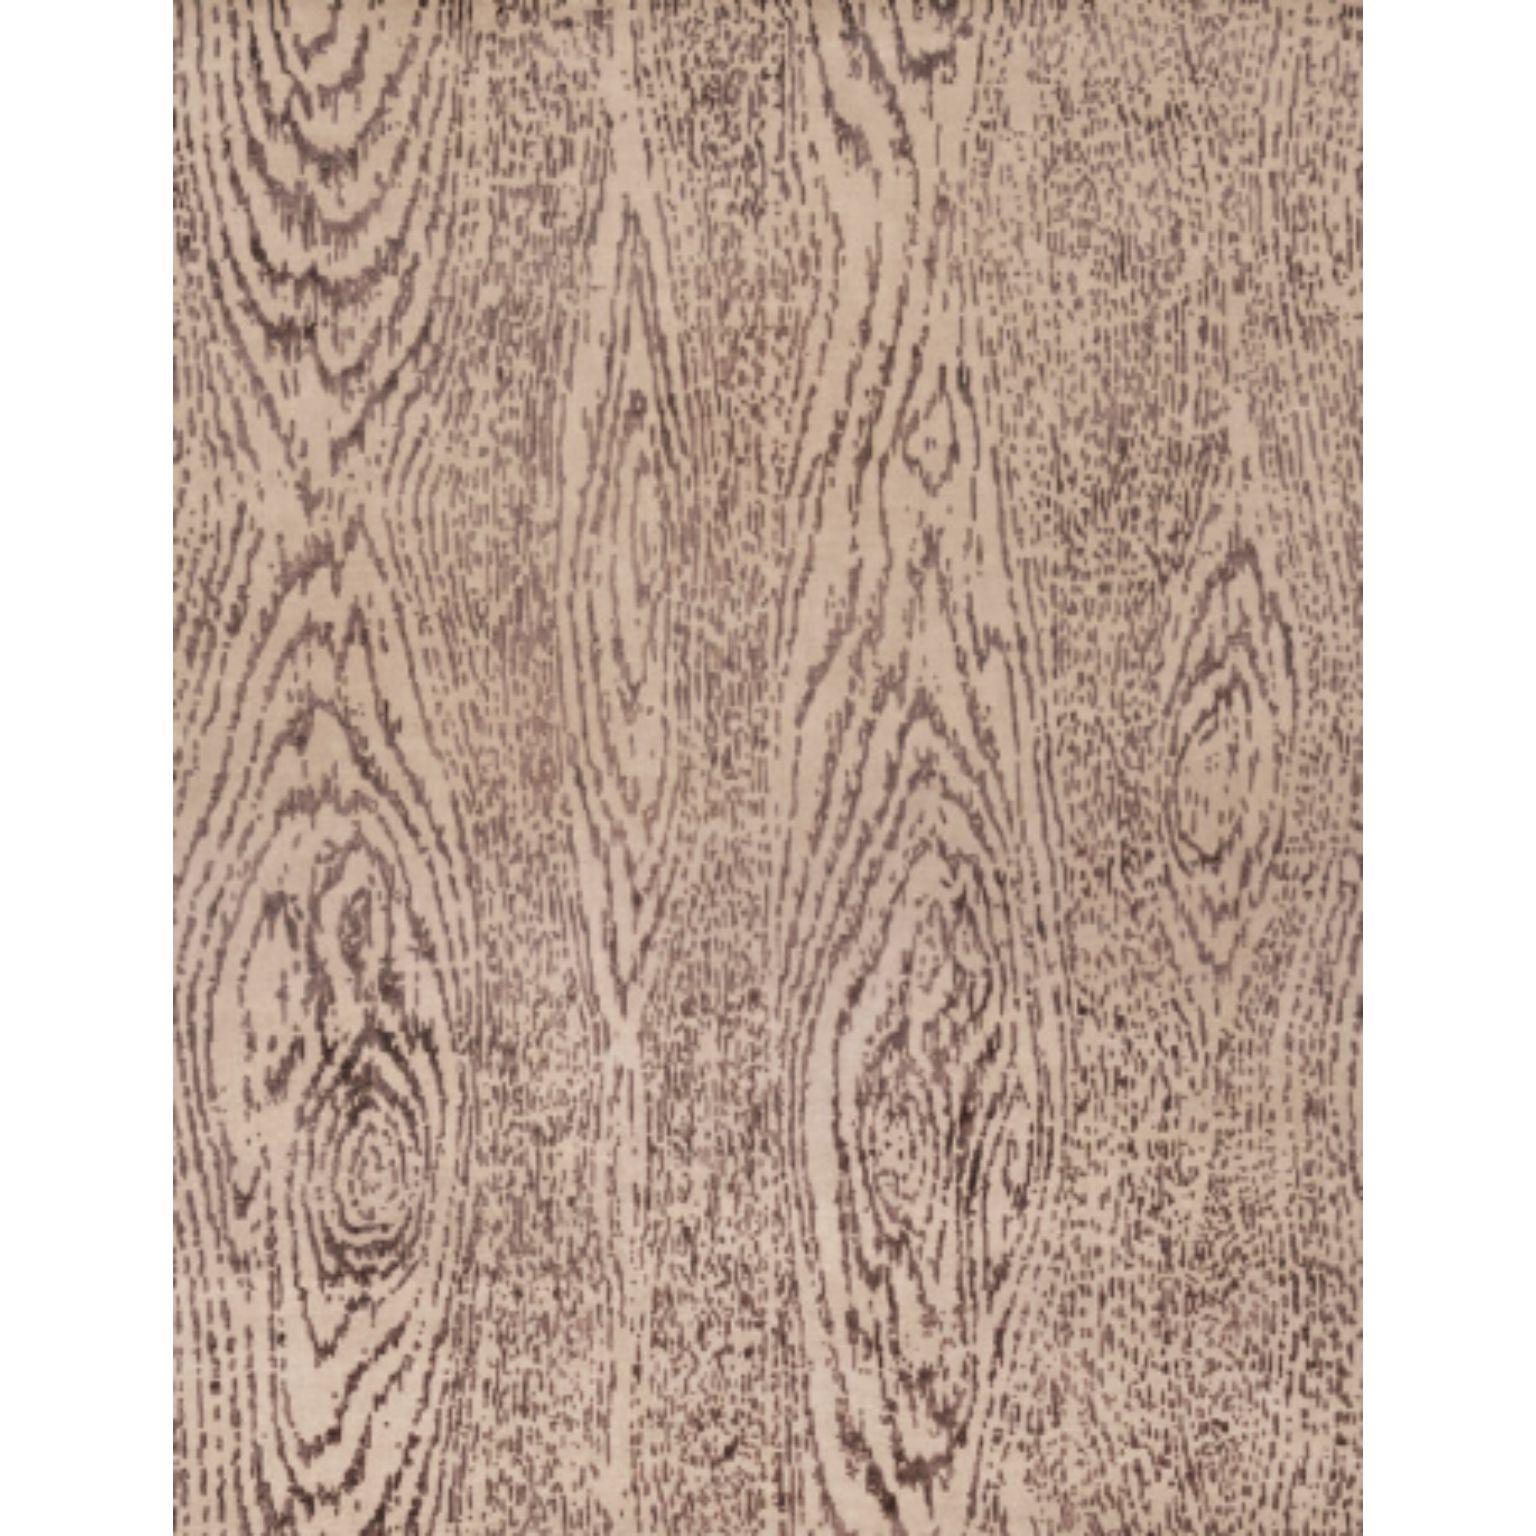 OAK 200 rug by Illulian.
Dimensions: D300 x H200 cm 
Materials: wool 50%, silk 50%
Variations available and prices may vary according to materials and sizes. 

Illulian, historic and prestigious rug company brand, internationally renowned in